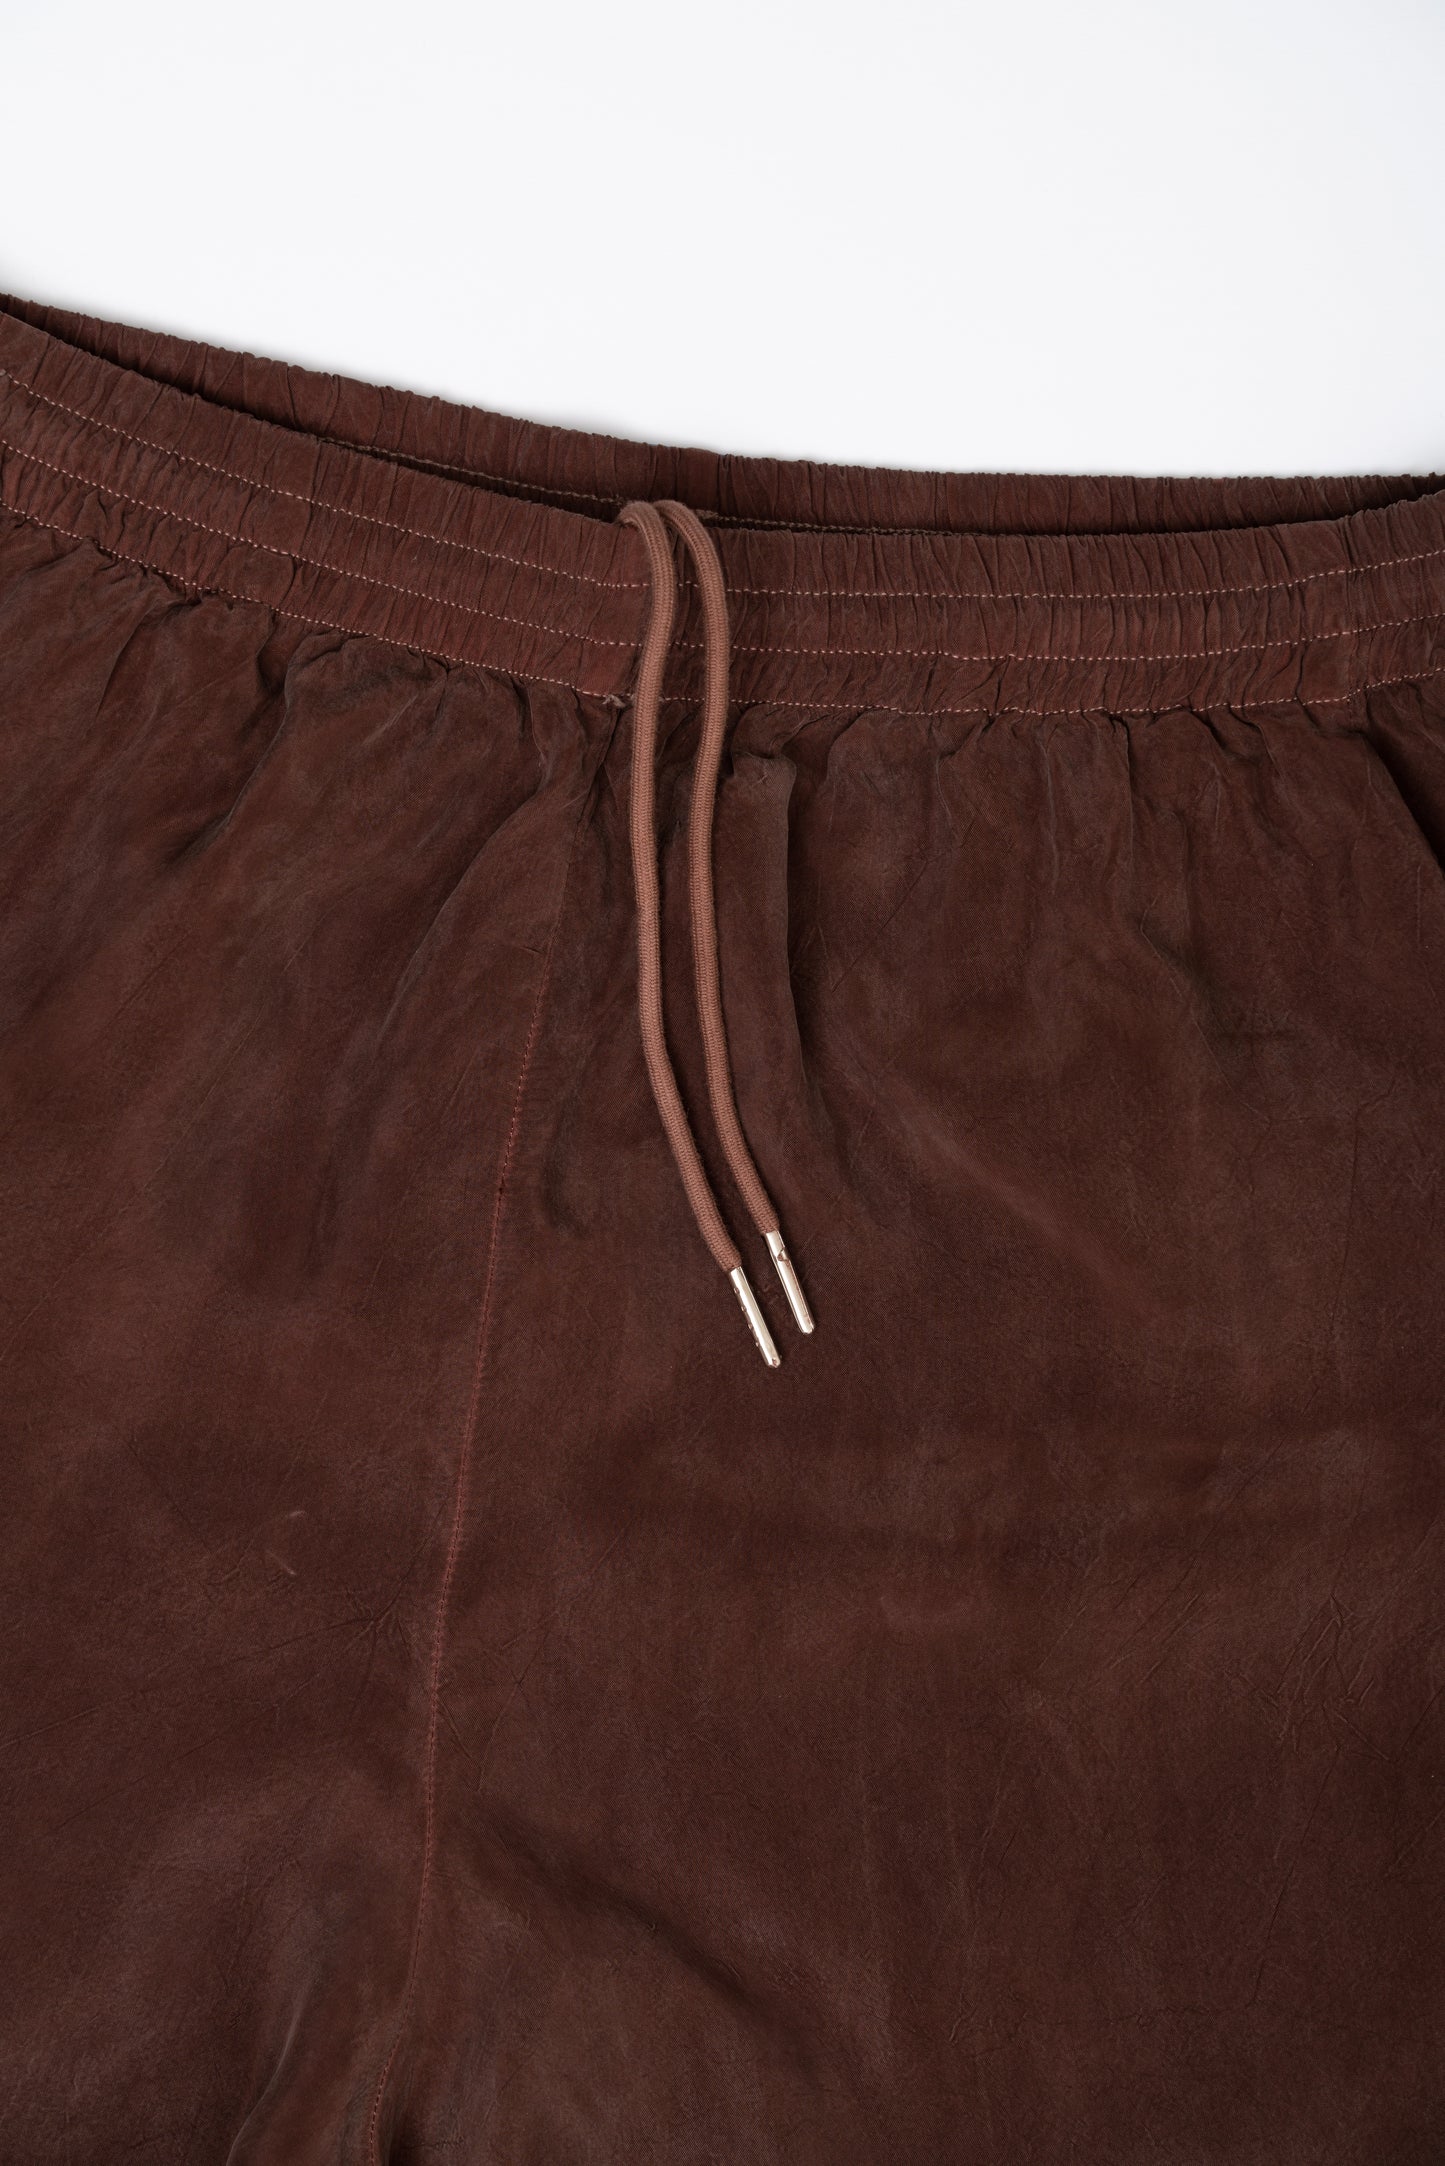 Iggy Short - Downtown Brown